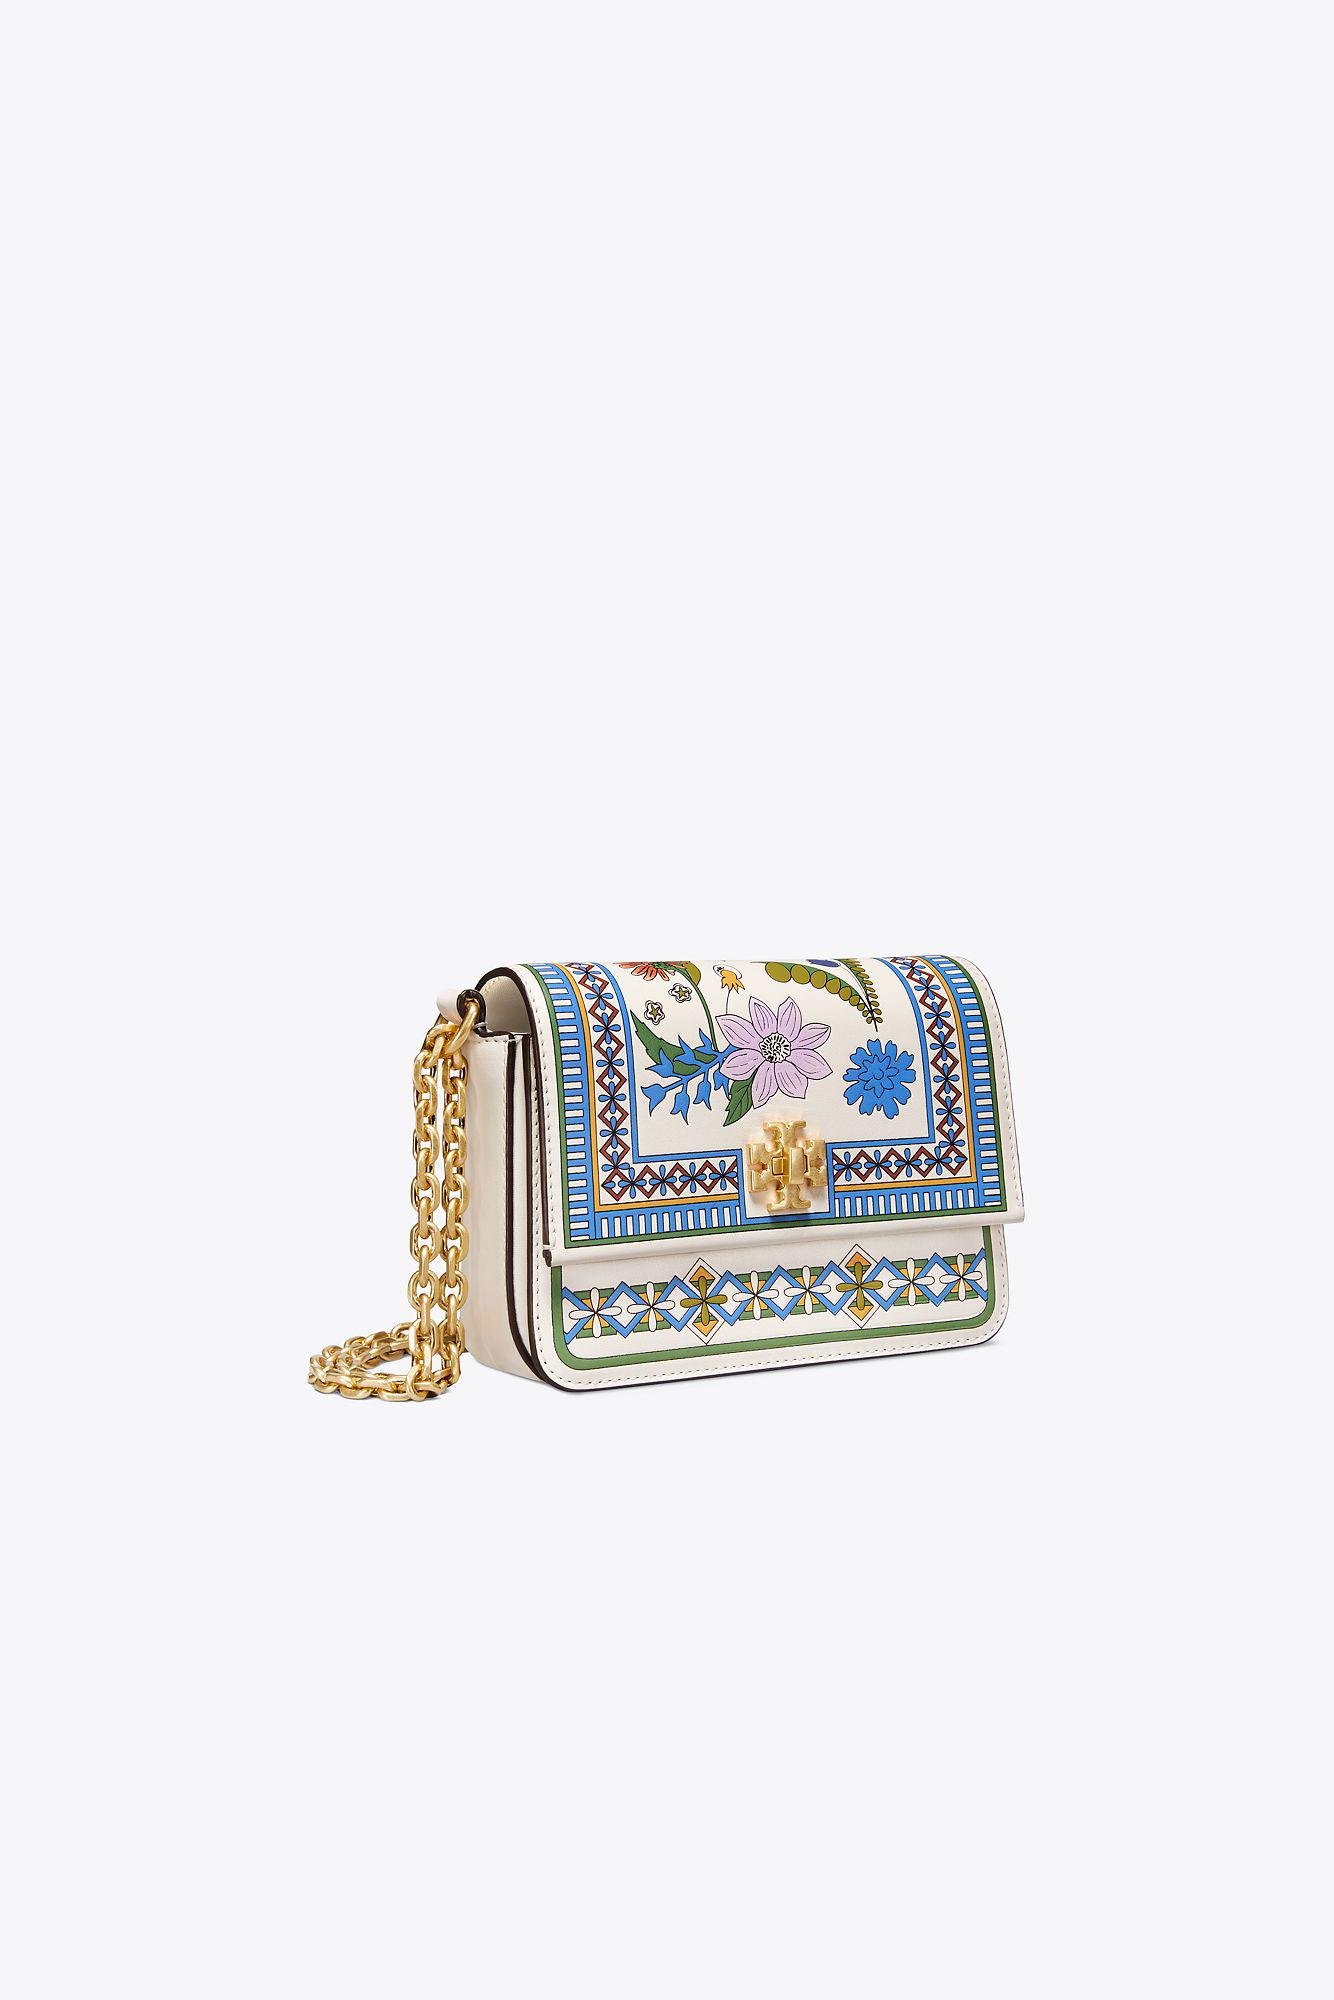 stand pack launch Tory Burch Kira Floral Mini Shoulder Bag | Lyst